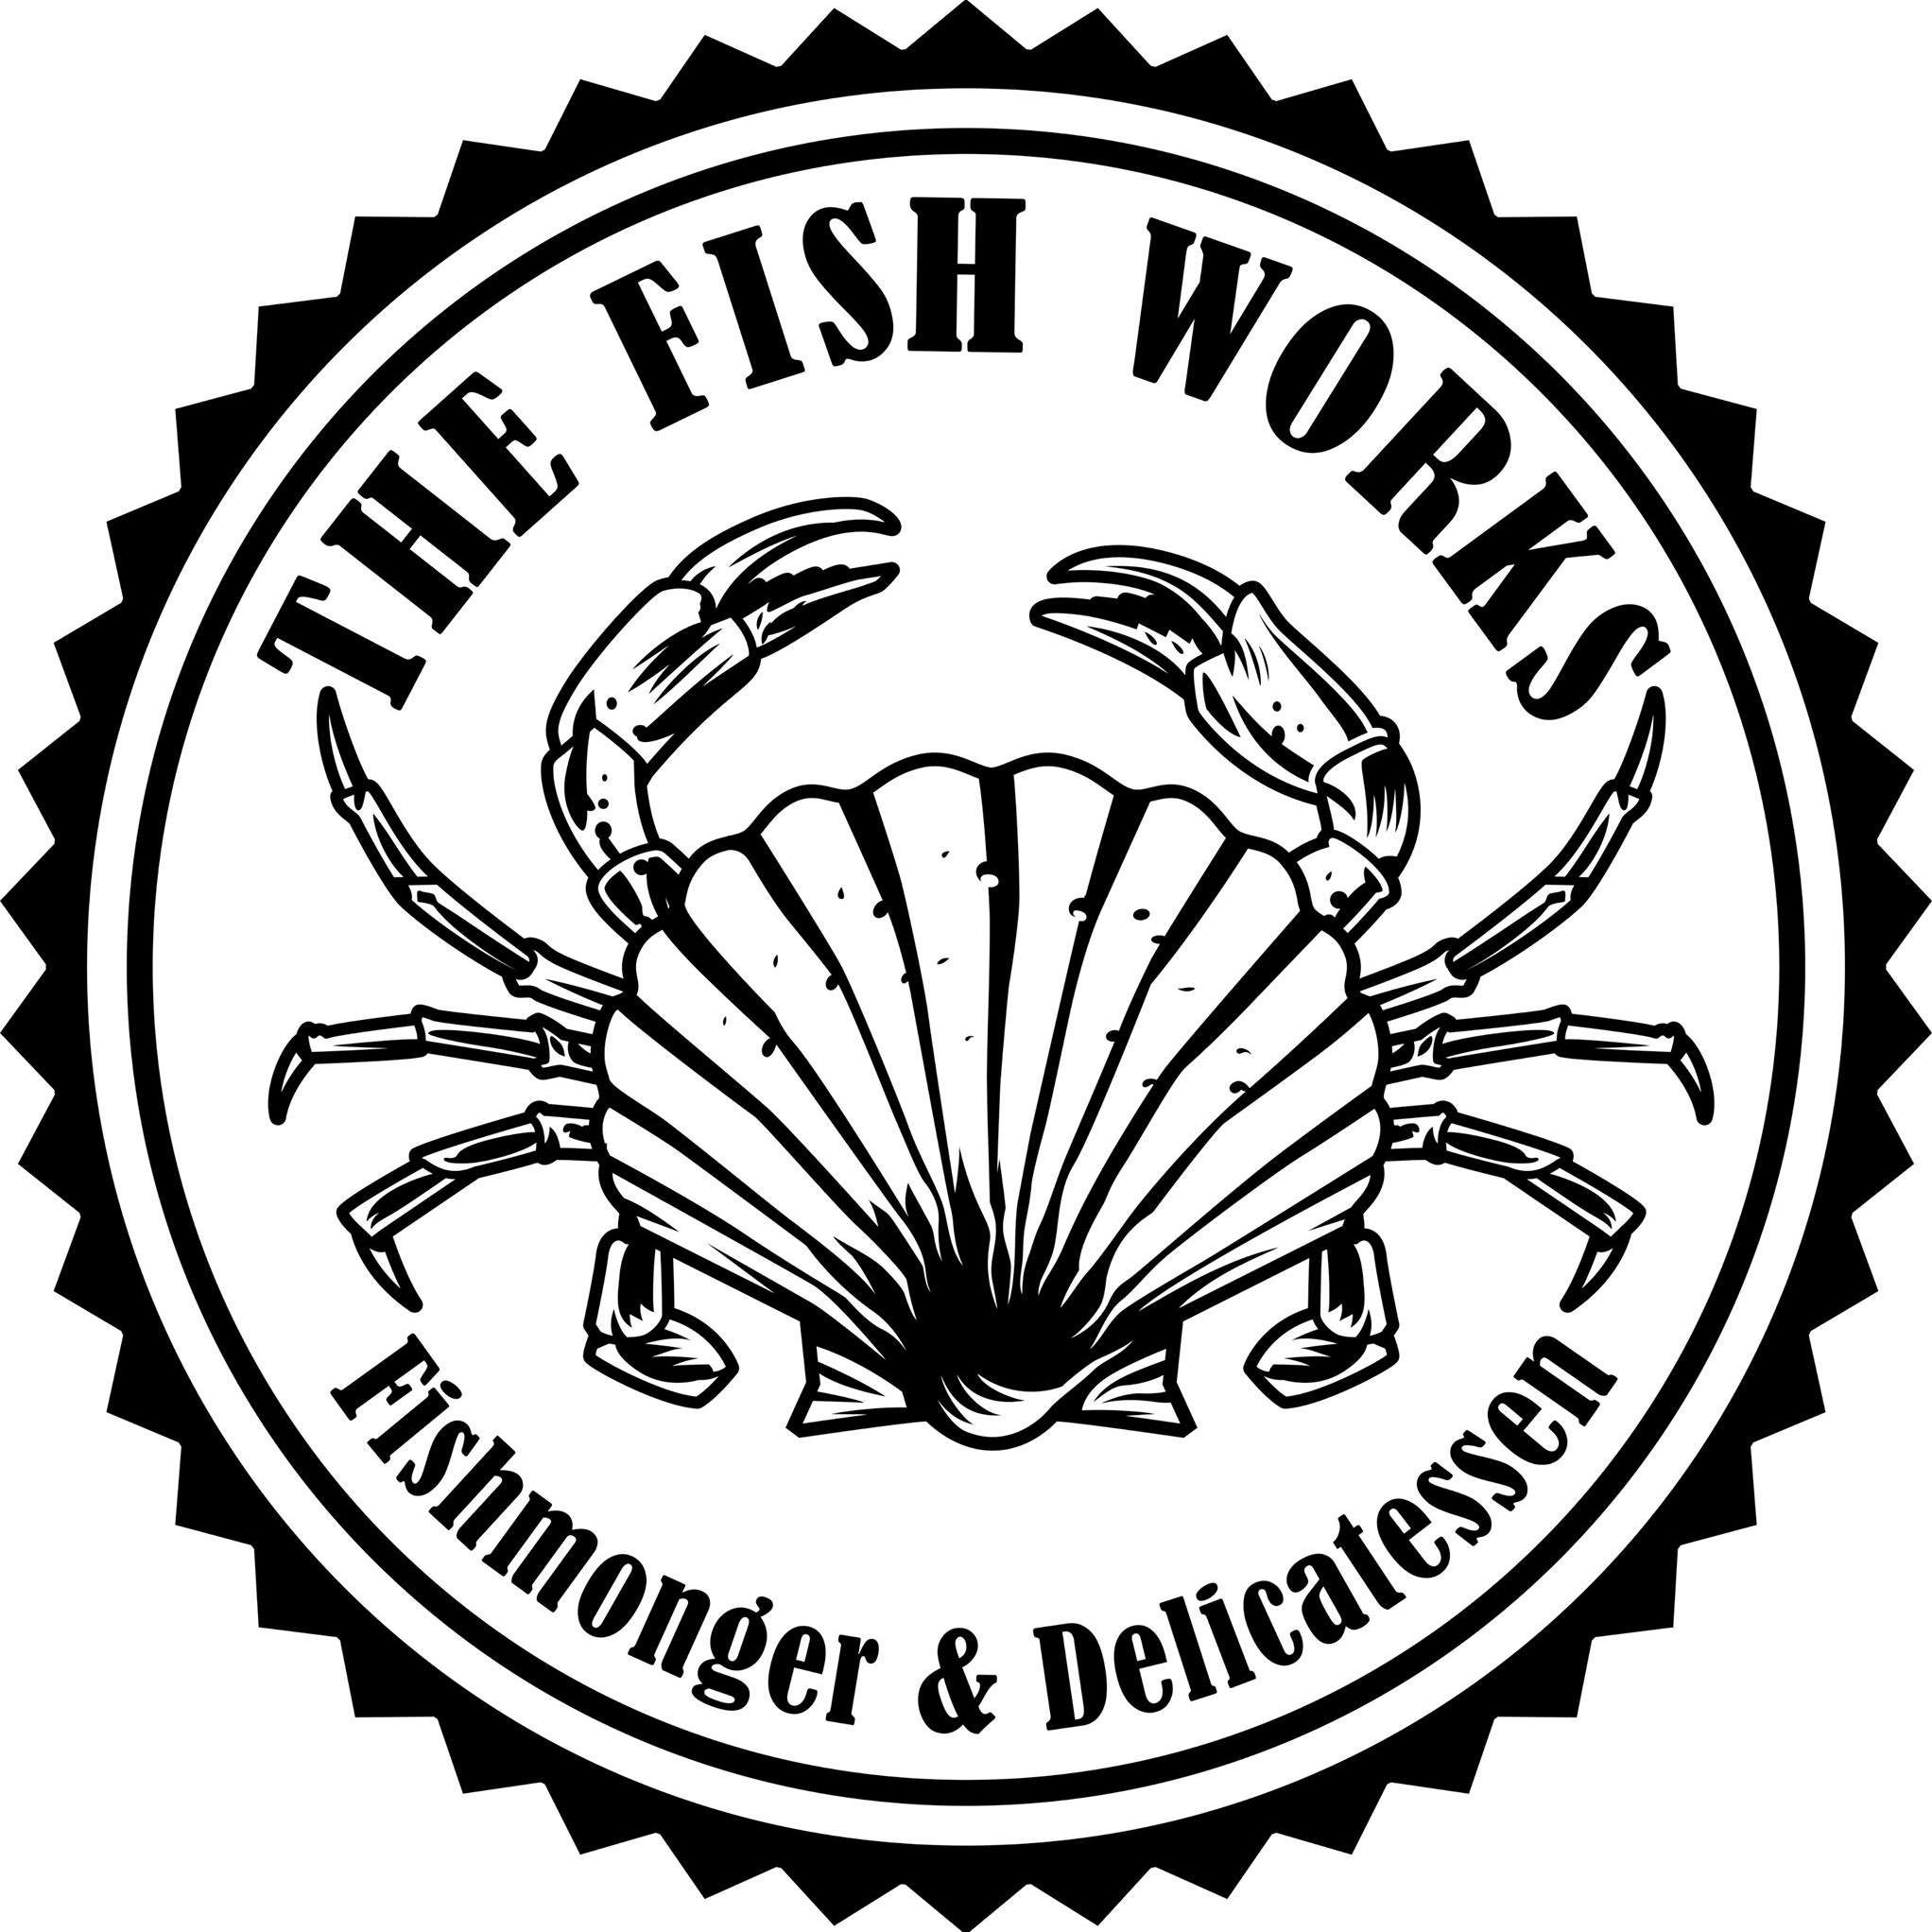 The Fish Works logo